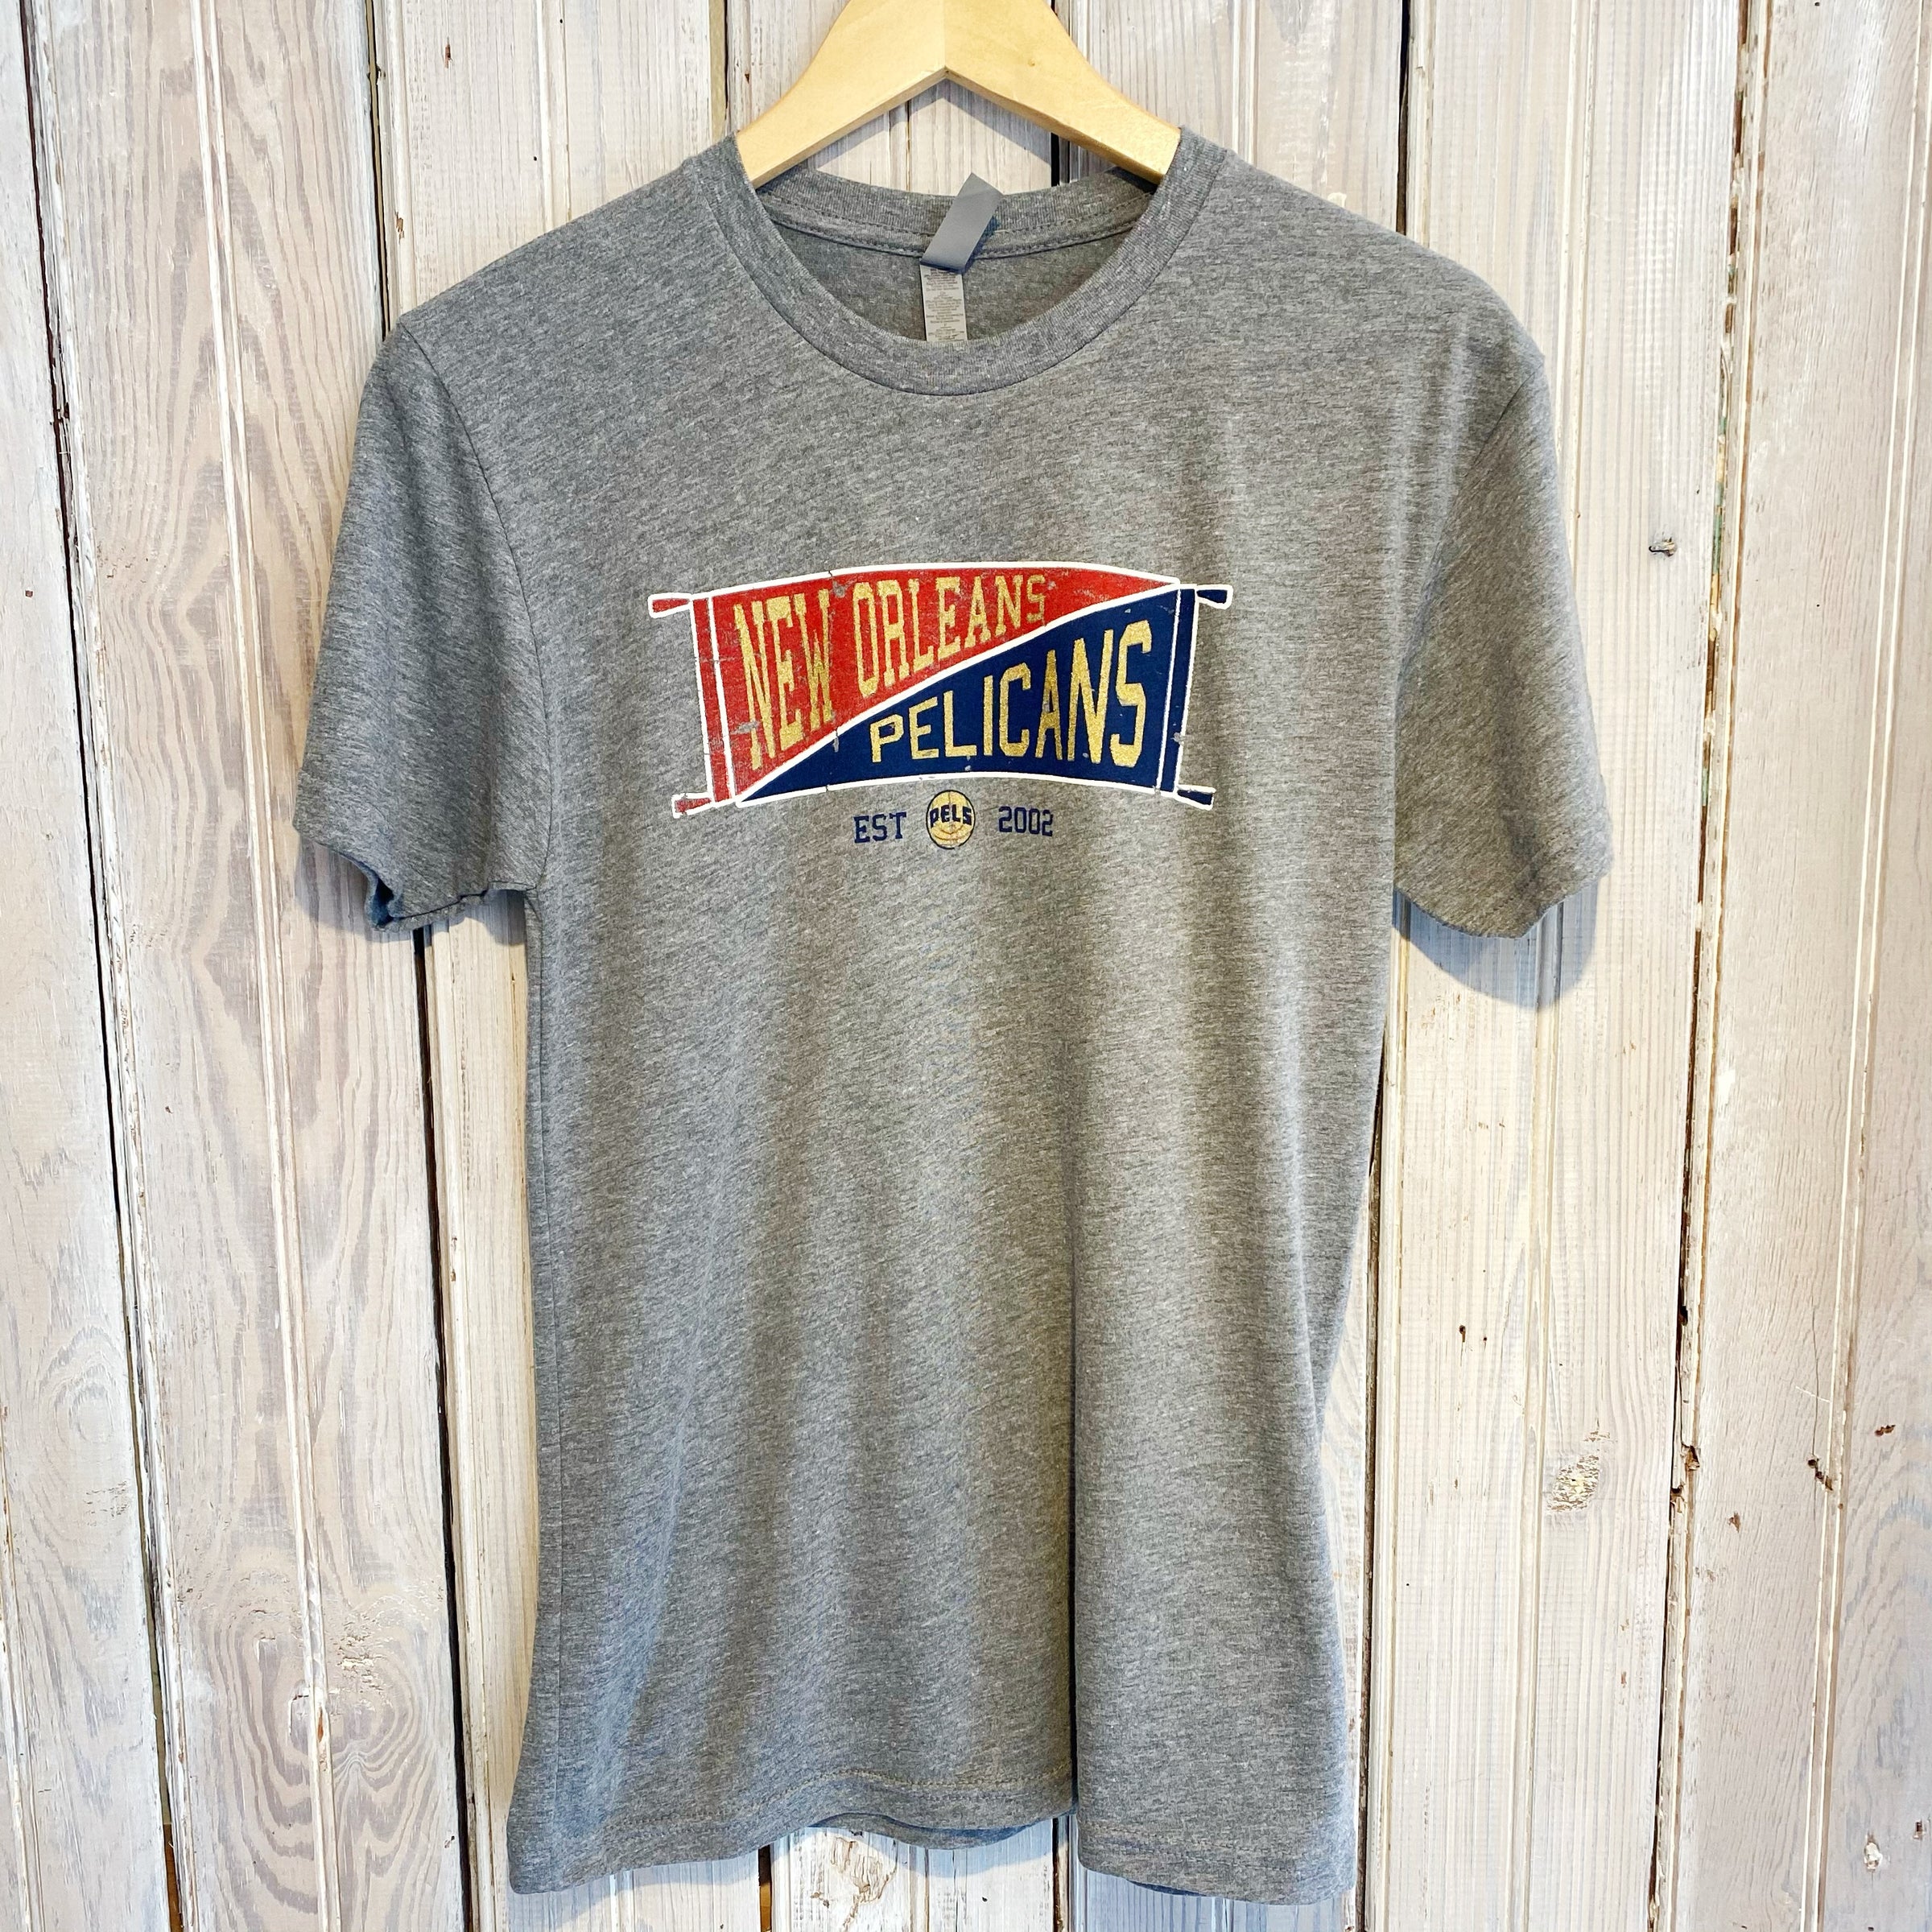 Jeantherapy Retro Pels New Orleans Tee-Vintage Navy XL